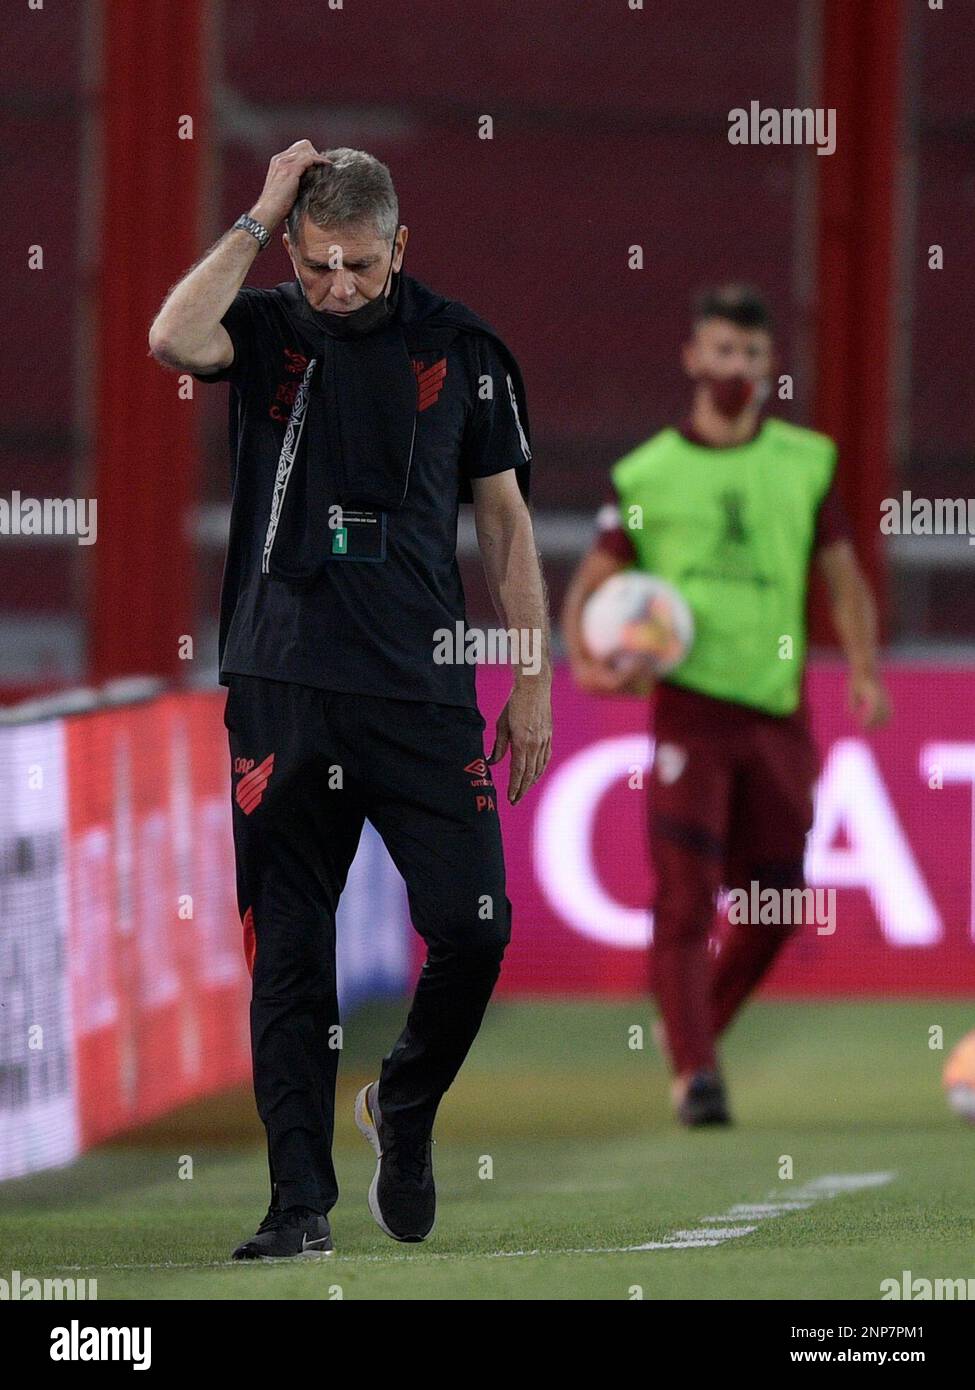 Coach Paulo Autori of Brazil's Athletico Paranaense scratches his head  during a Copa Libertadores round of sixteen second leg soccer match against  Argentina's River Plate at the Libertadores de America stadium in